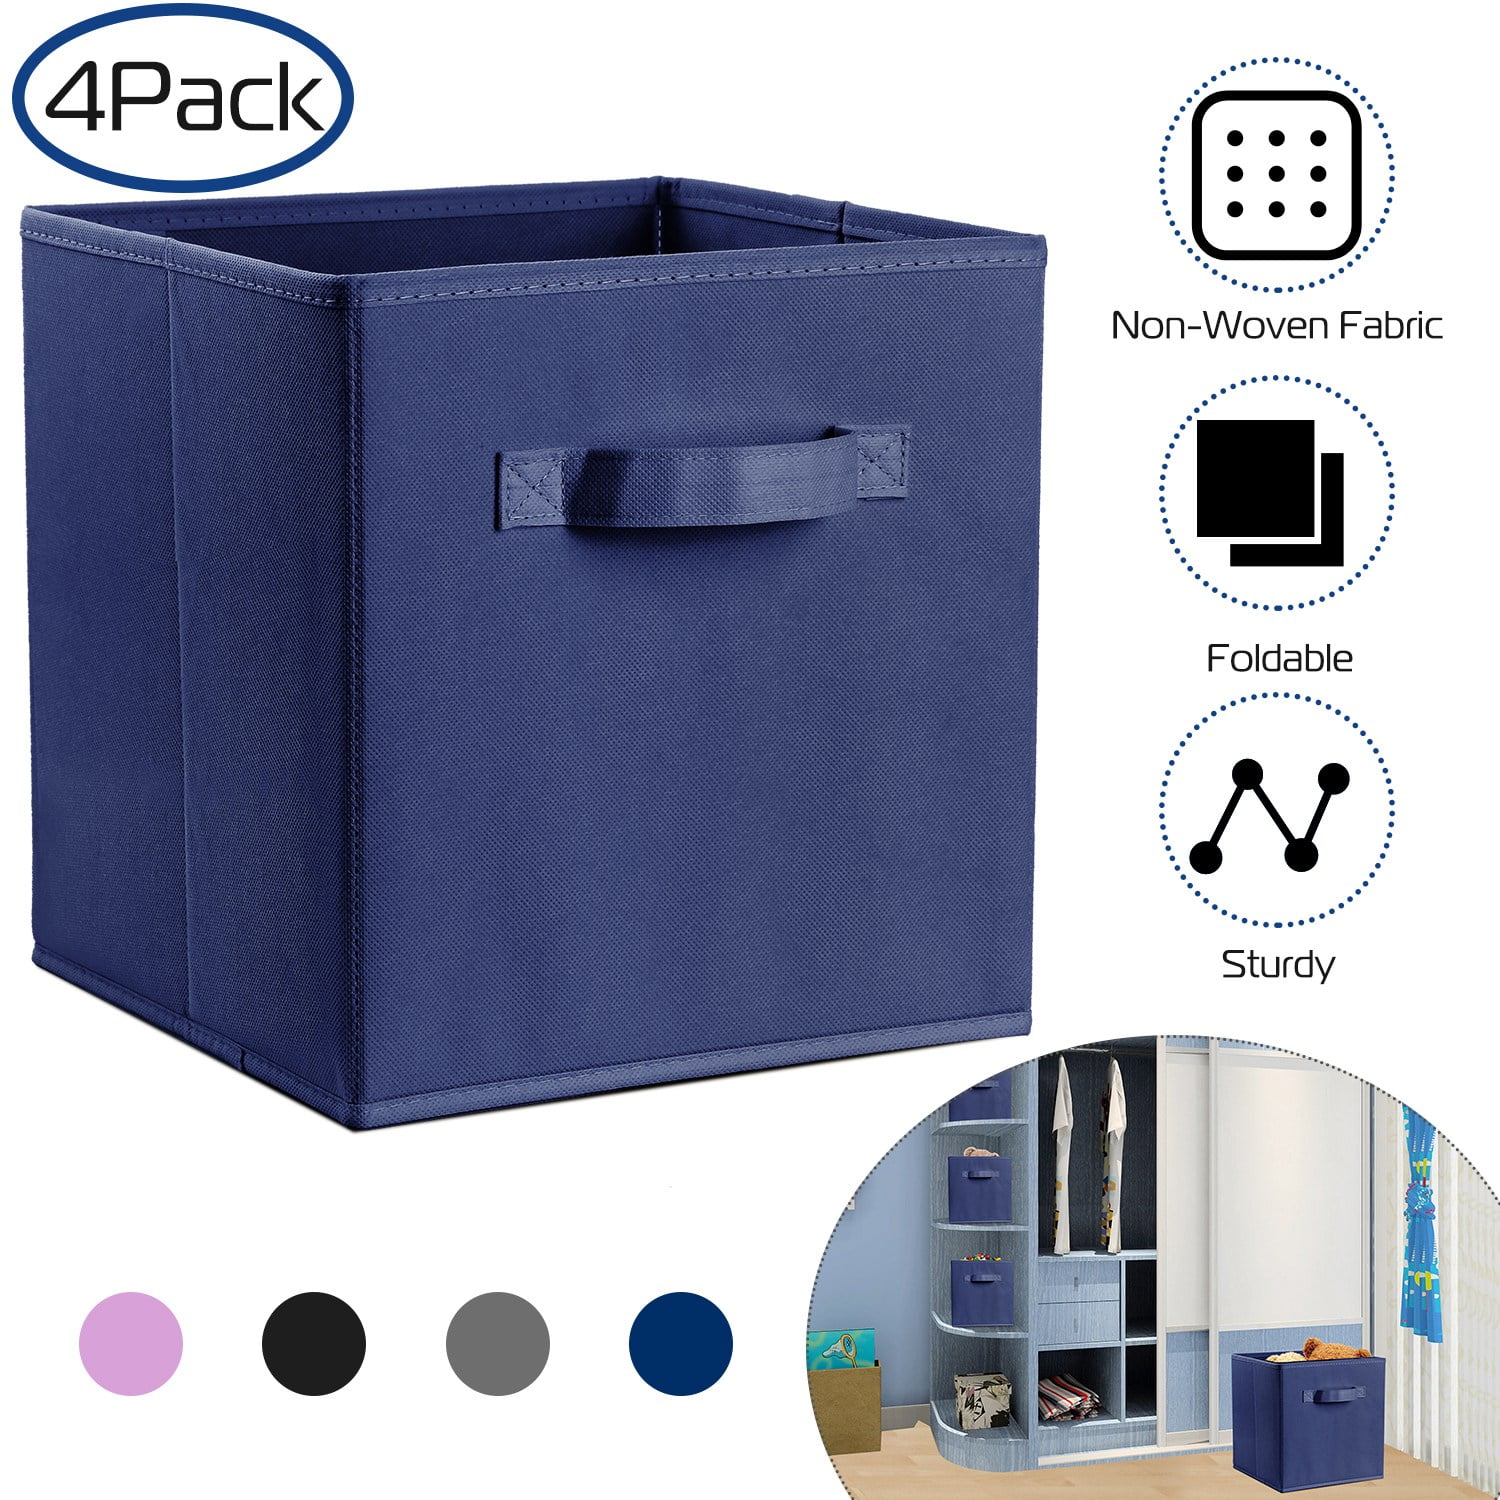 Details about   FABRIC CUBE STORAGE BIN Collapsible Organizer Multiple Colors Set of 4 